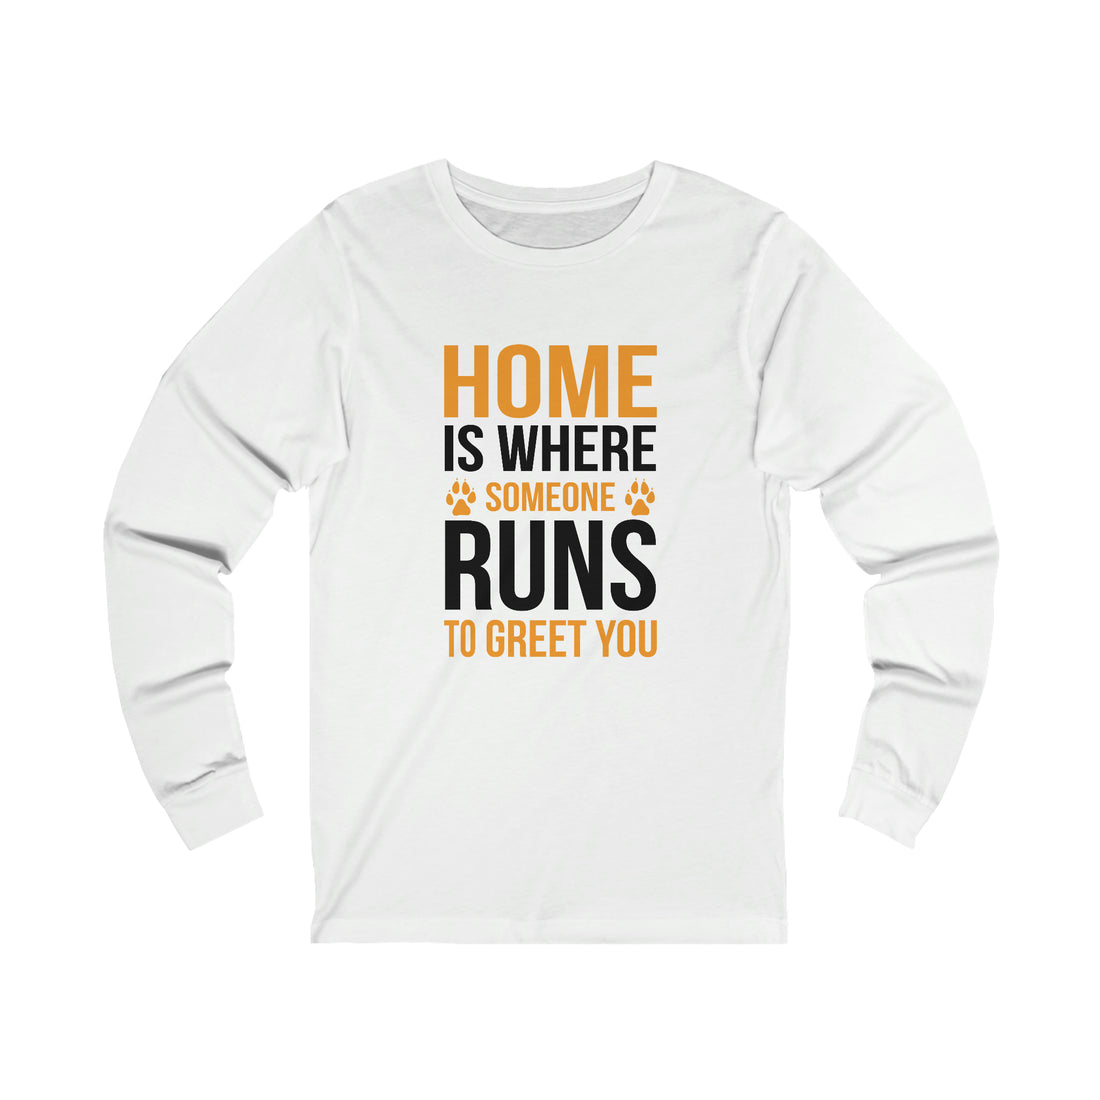 Home Is Where Someone Runs To Greet You - Unisex Jersey Long Sleeve Tee